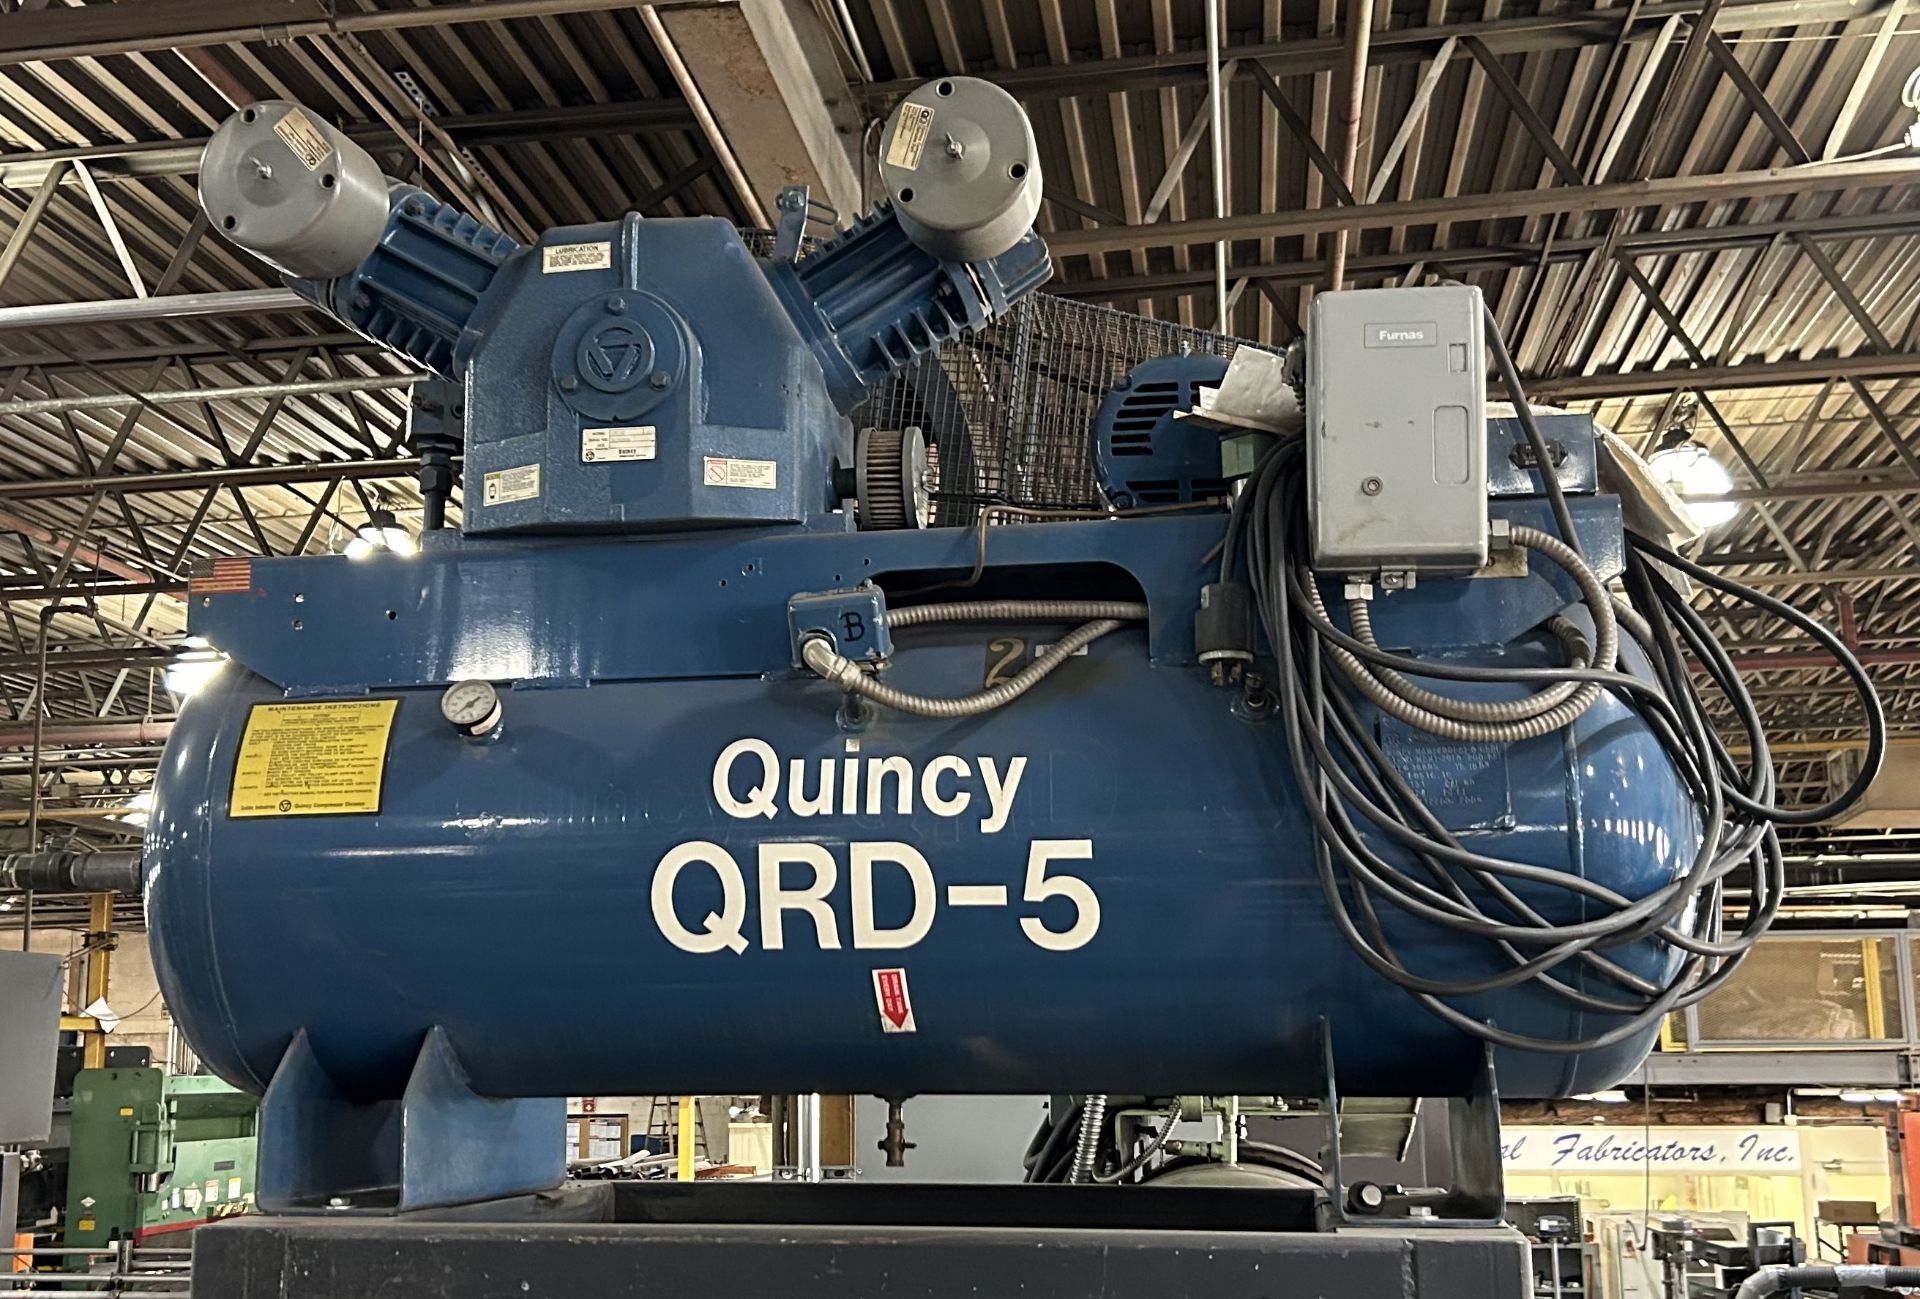 Quincy QRD-5 Mod.80S 5HP 2 Stage 80 Gallon Air Compressor - S/N 5040655, 208-230/460/3/60